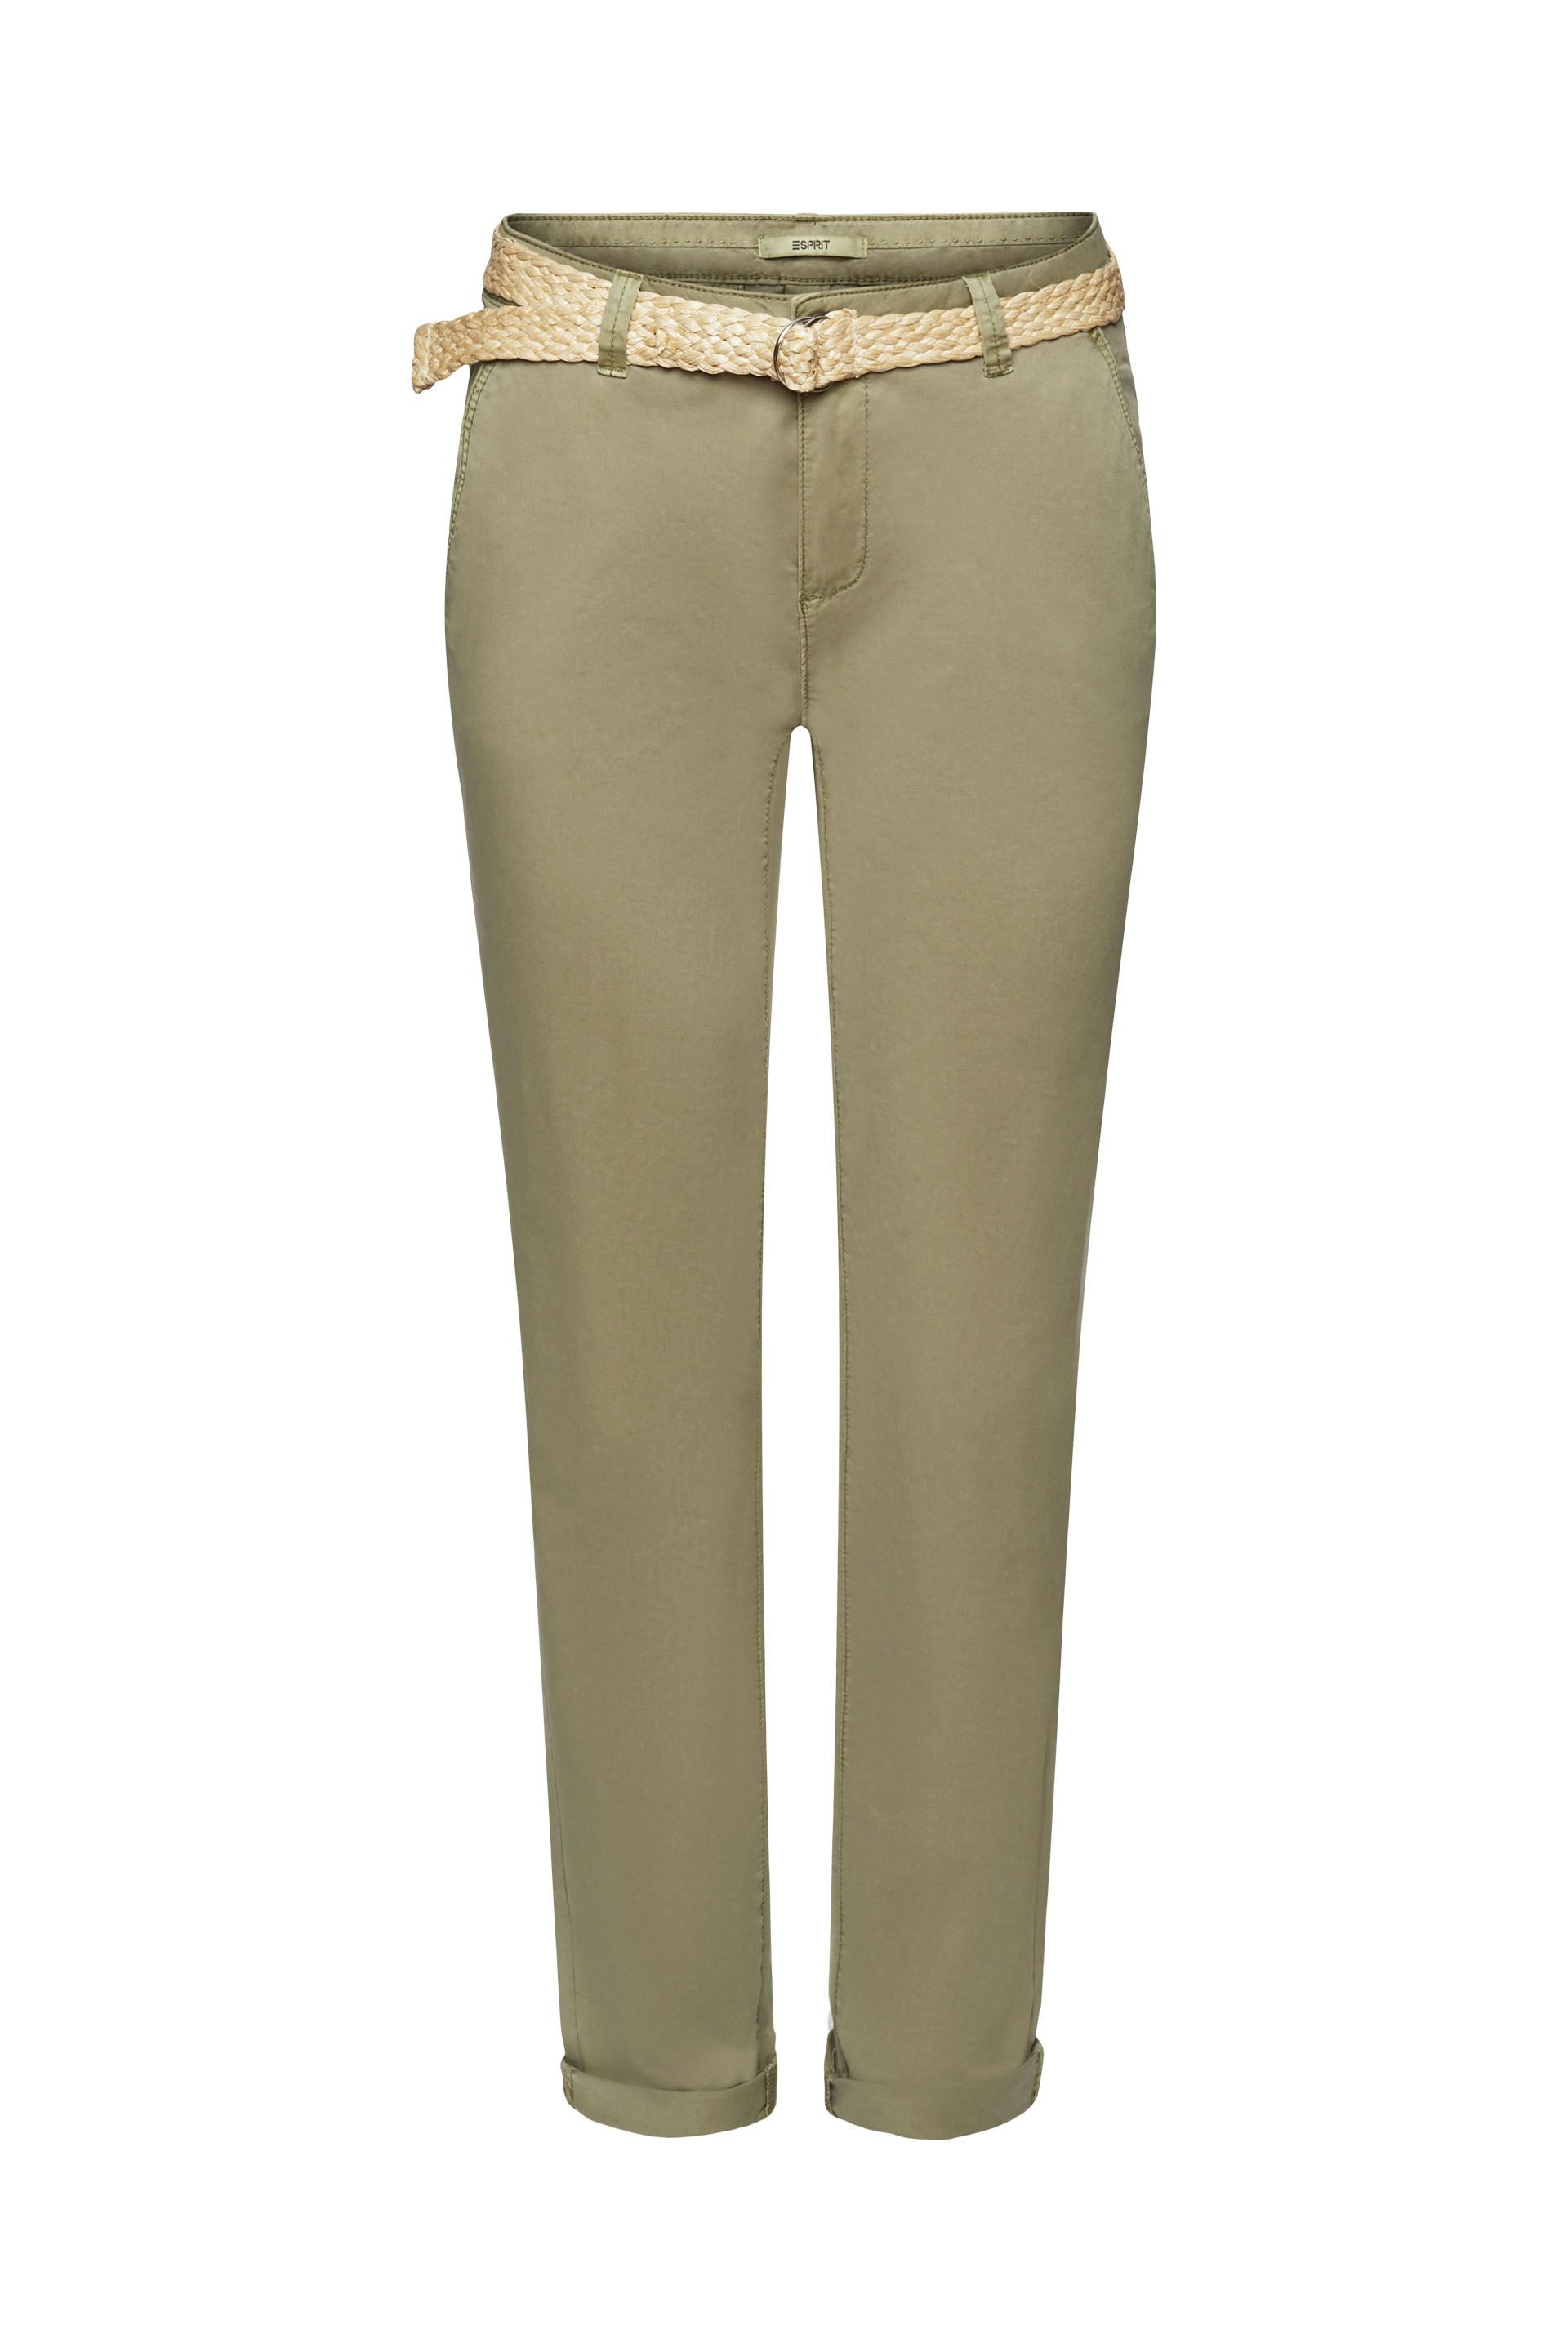 Esprit - Cropped chinos with belt, Sage Green, large image number 0